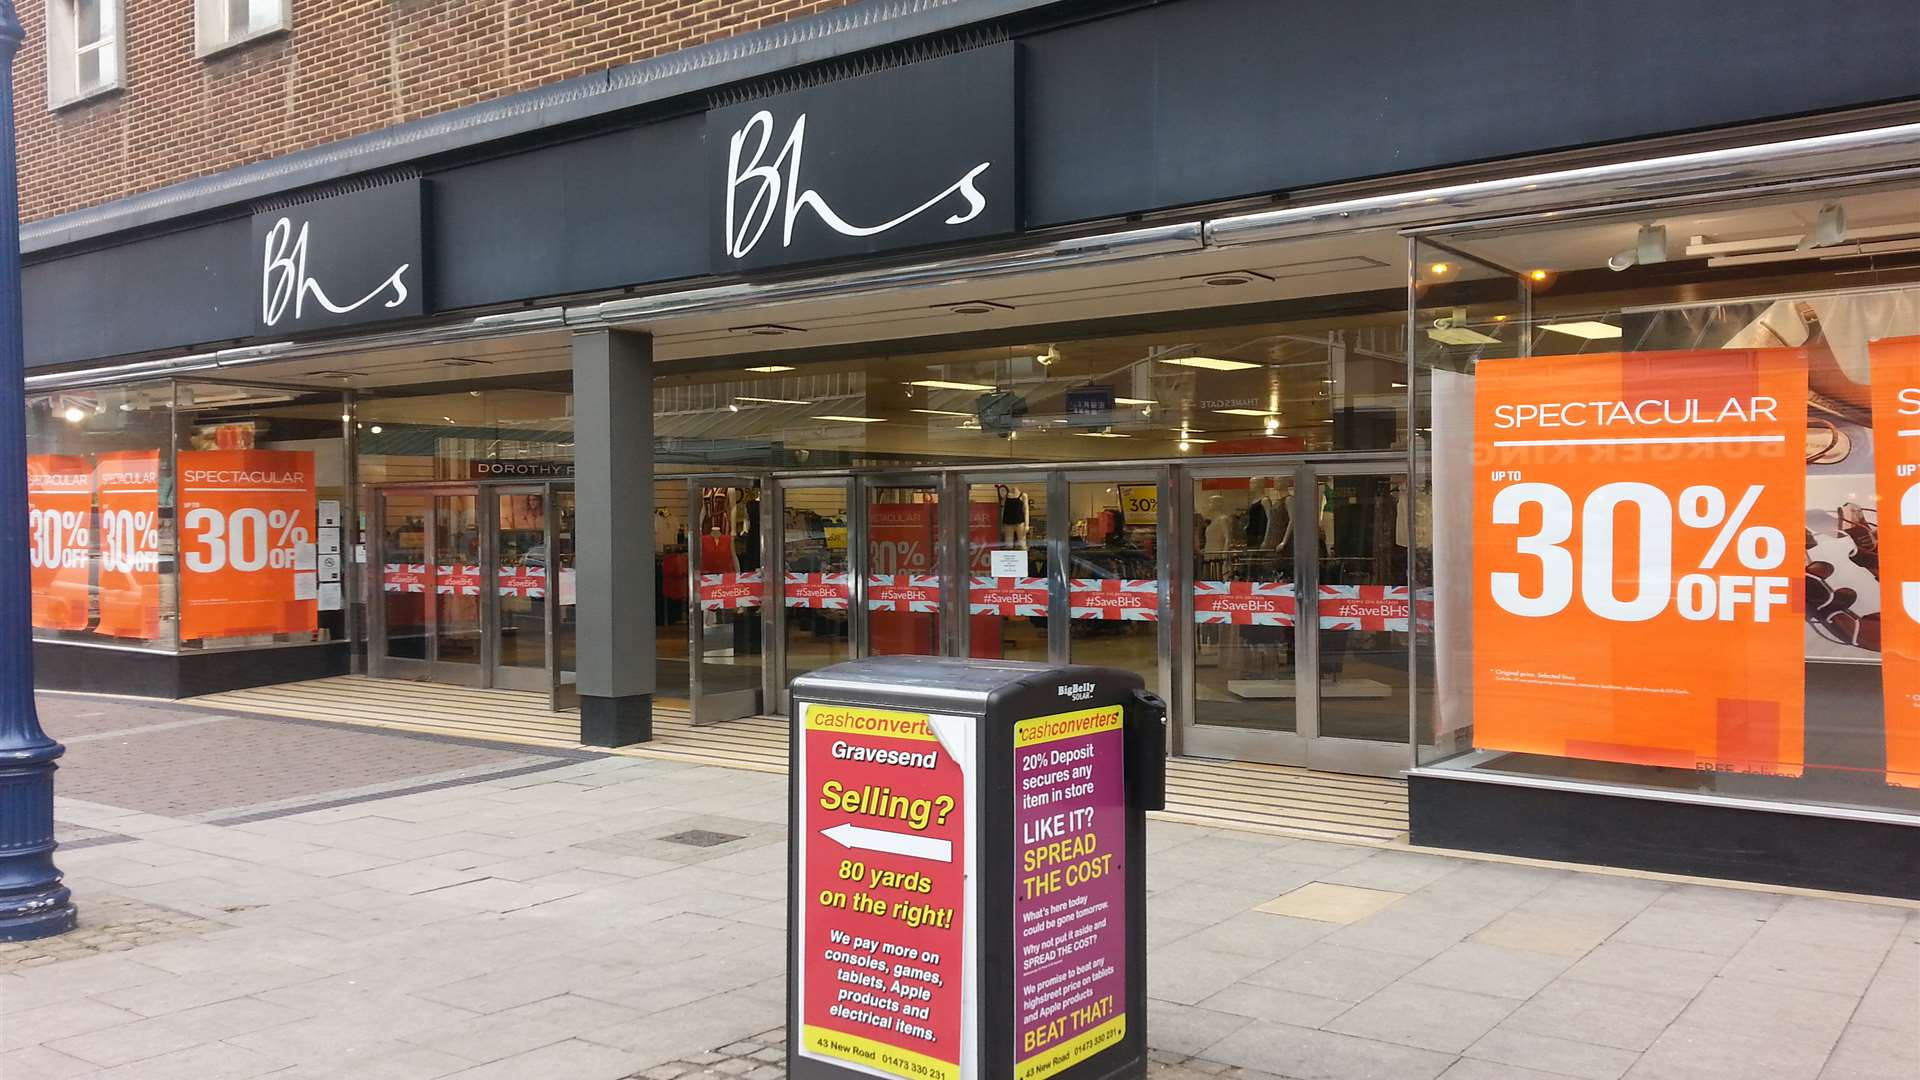 The BHS in Gravesend